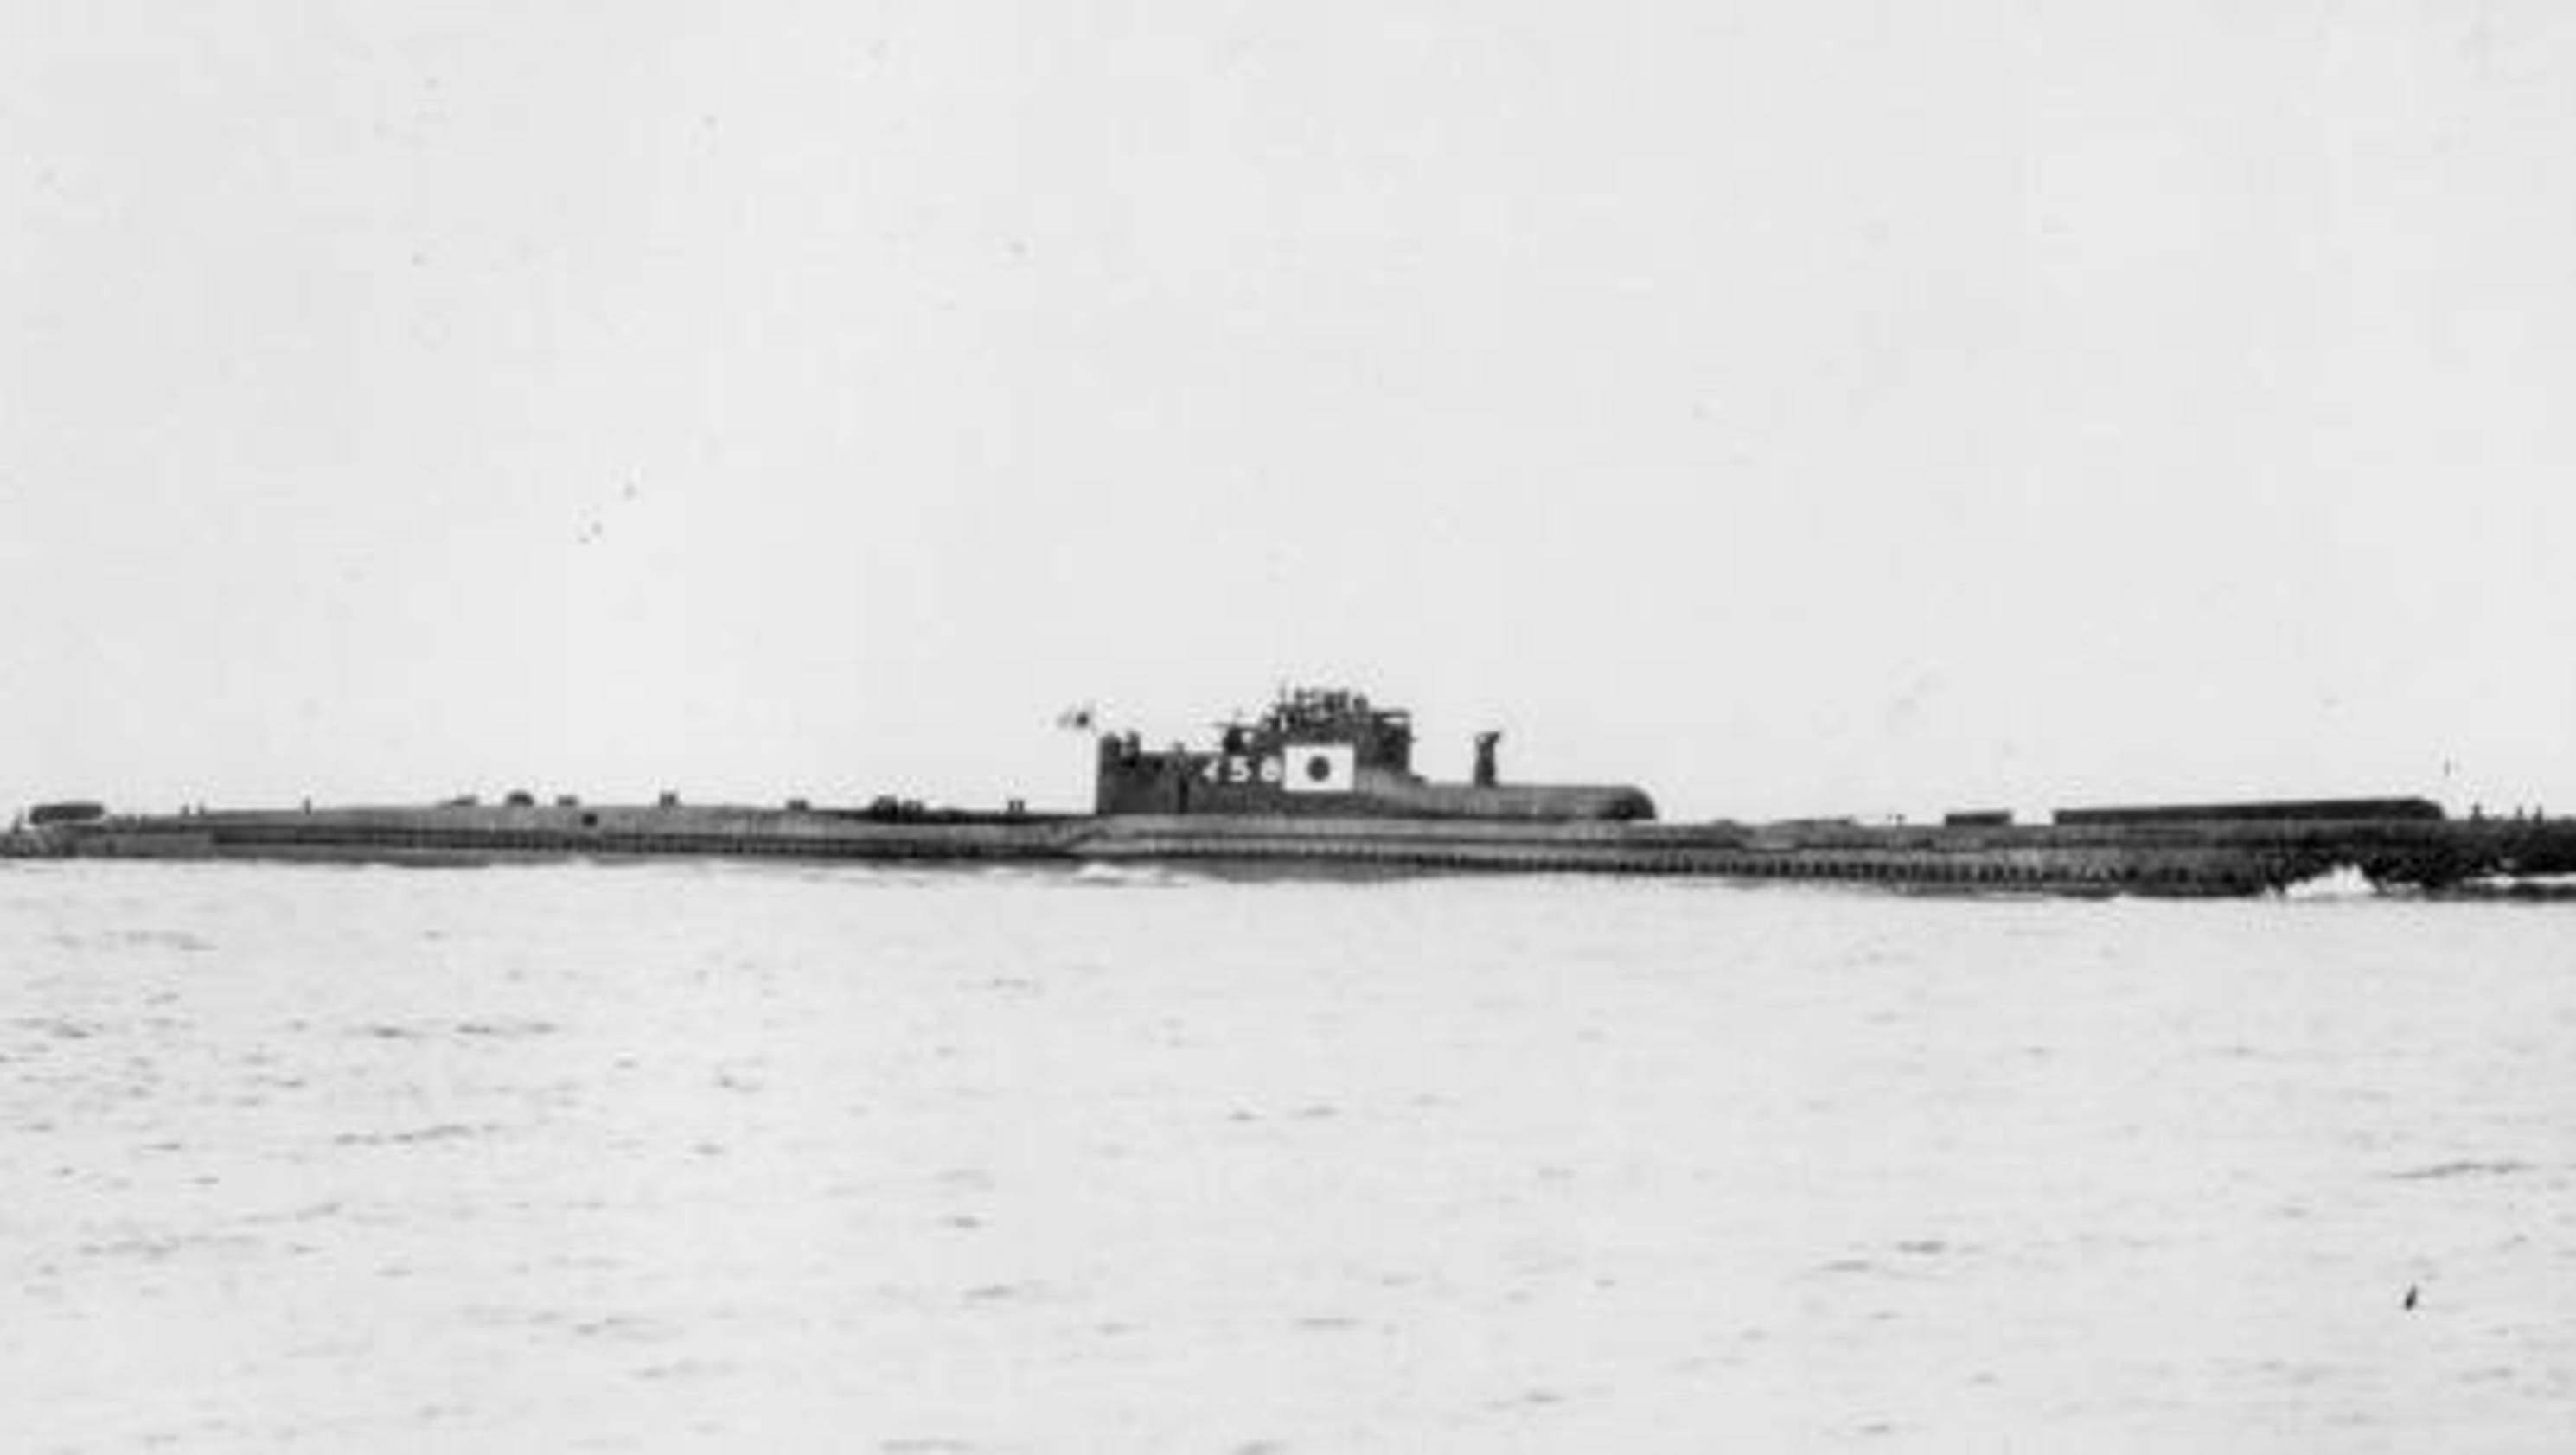 Researchers find Japanese sub that sunk USS Indianapolis